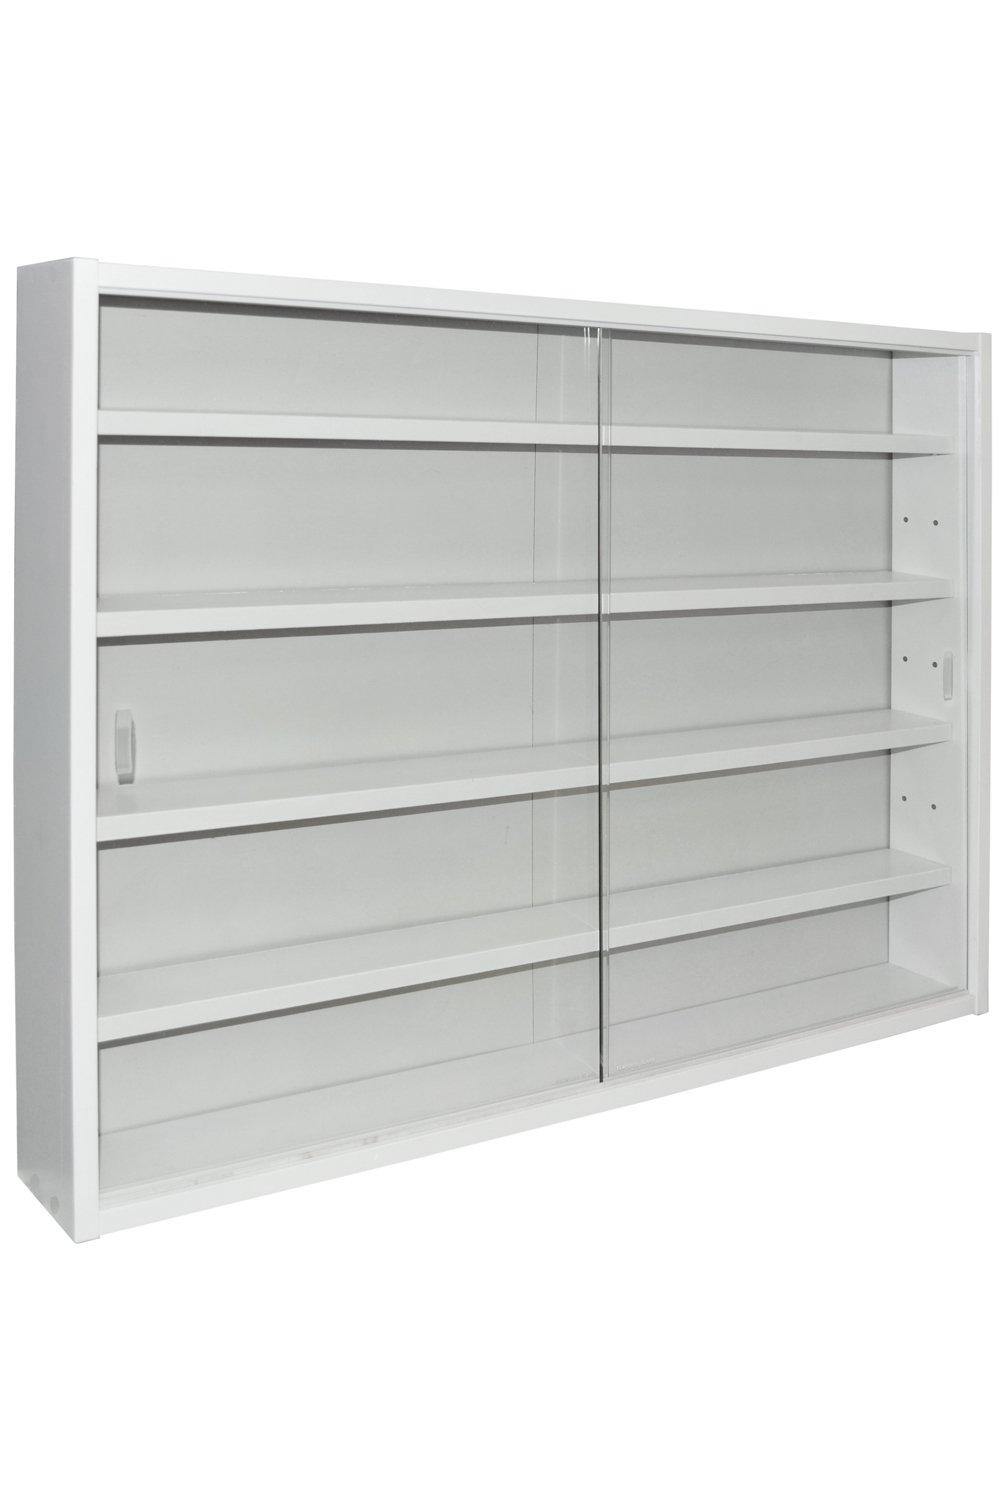 'Reveal'  4 Shelf Glass Wall Collectors Display Cabinet  White